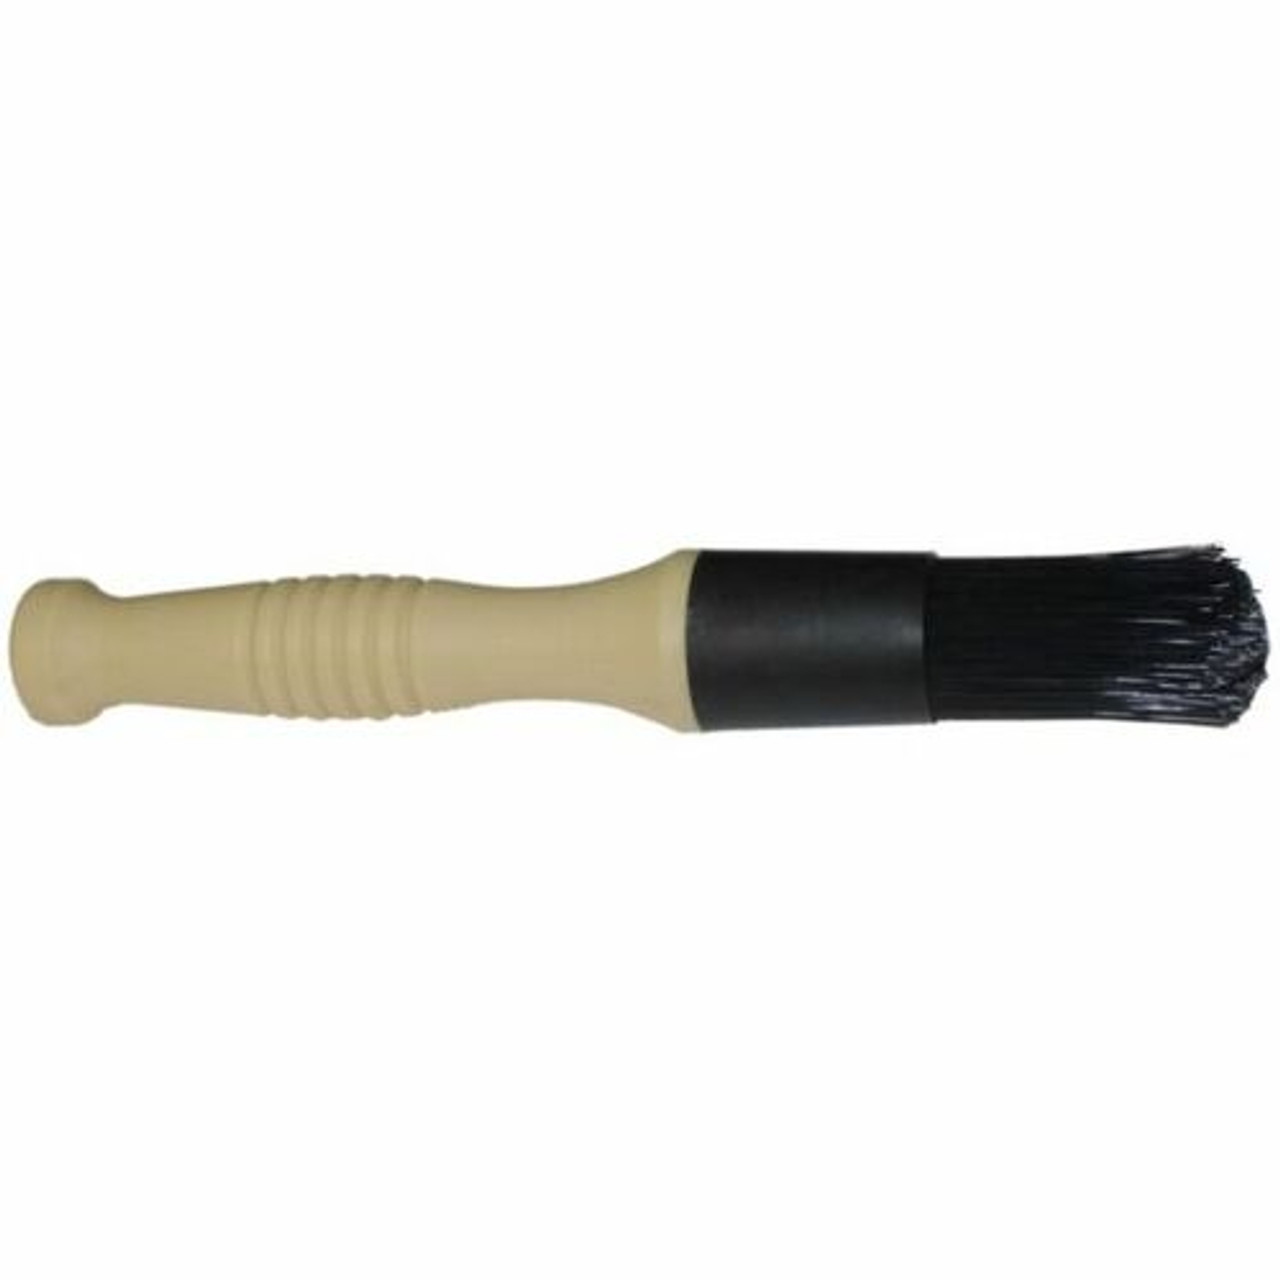 S.M. Arnold 85-626 Heavy Duty Interior and Upholstery Brush